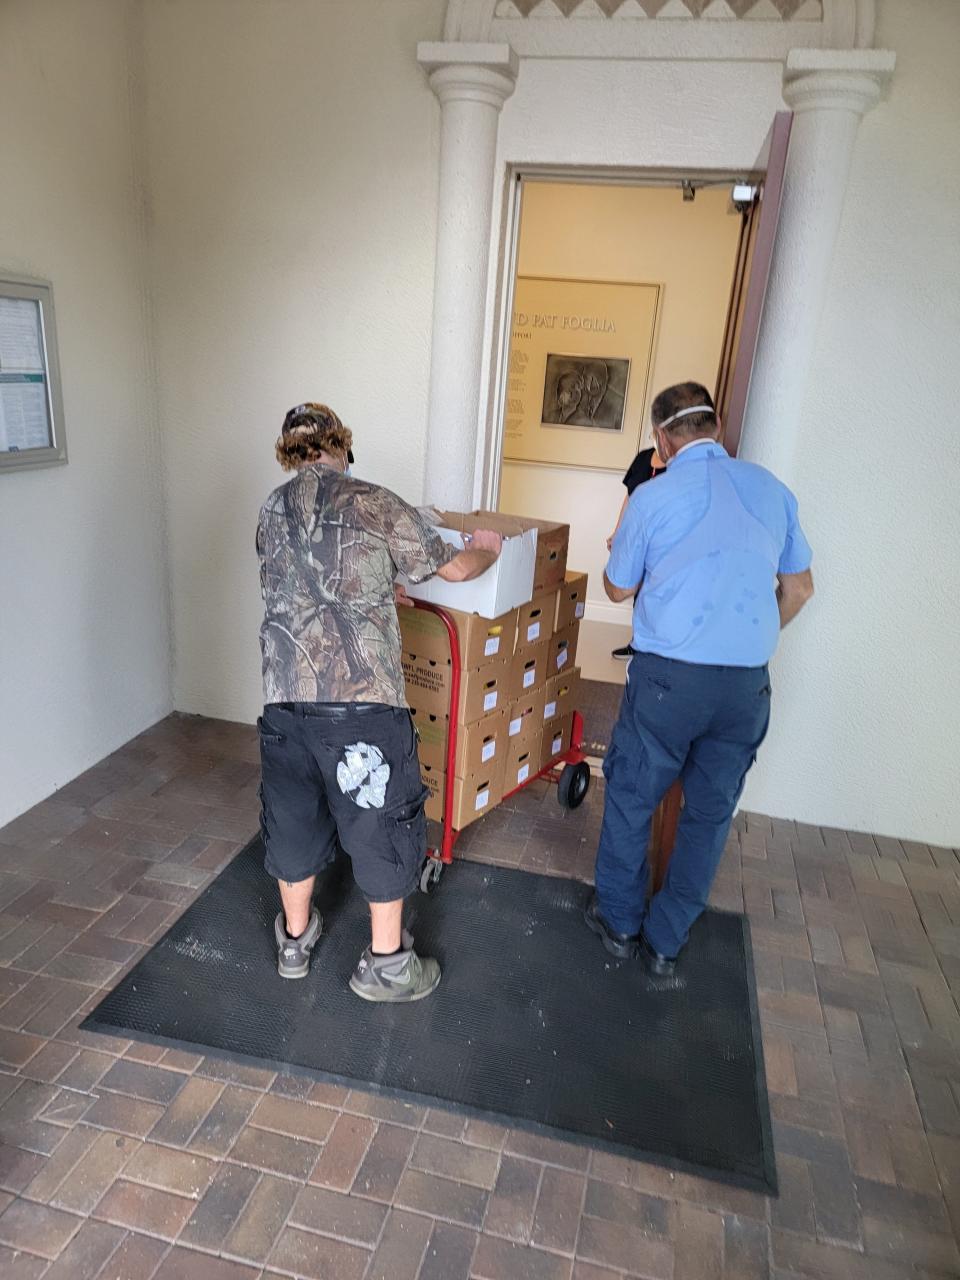 The American Heart Association drops off fresh fruit and vegetables to the Neighborhood Health Clinic in Naples so clinic patients have access to healthier food.  (Submitted)